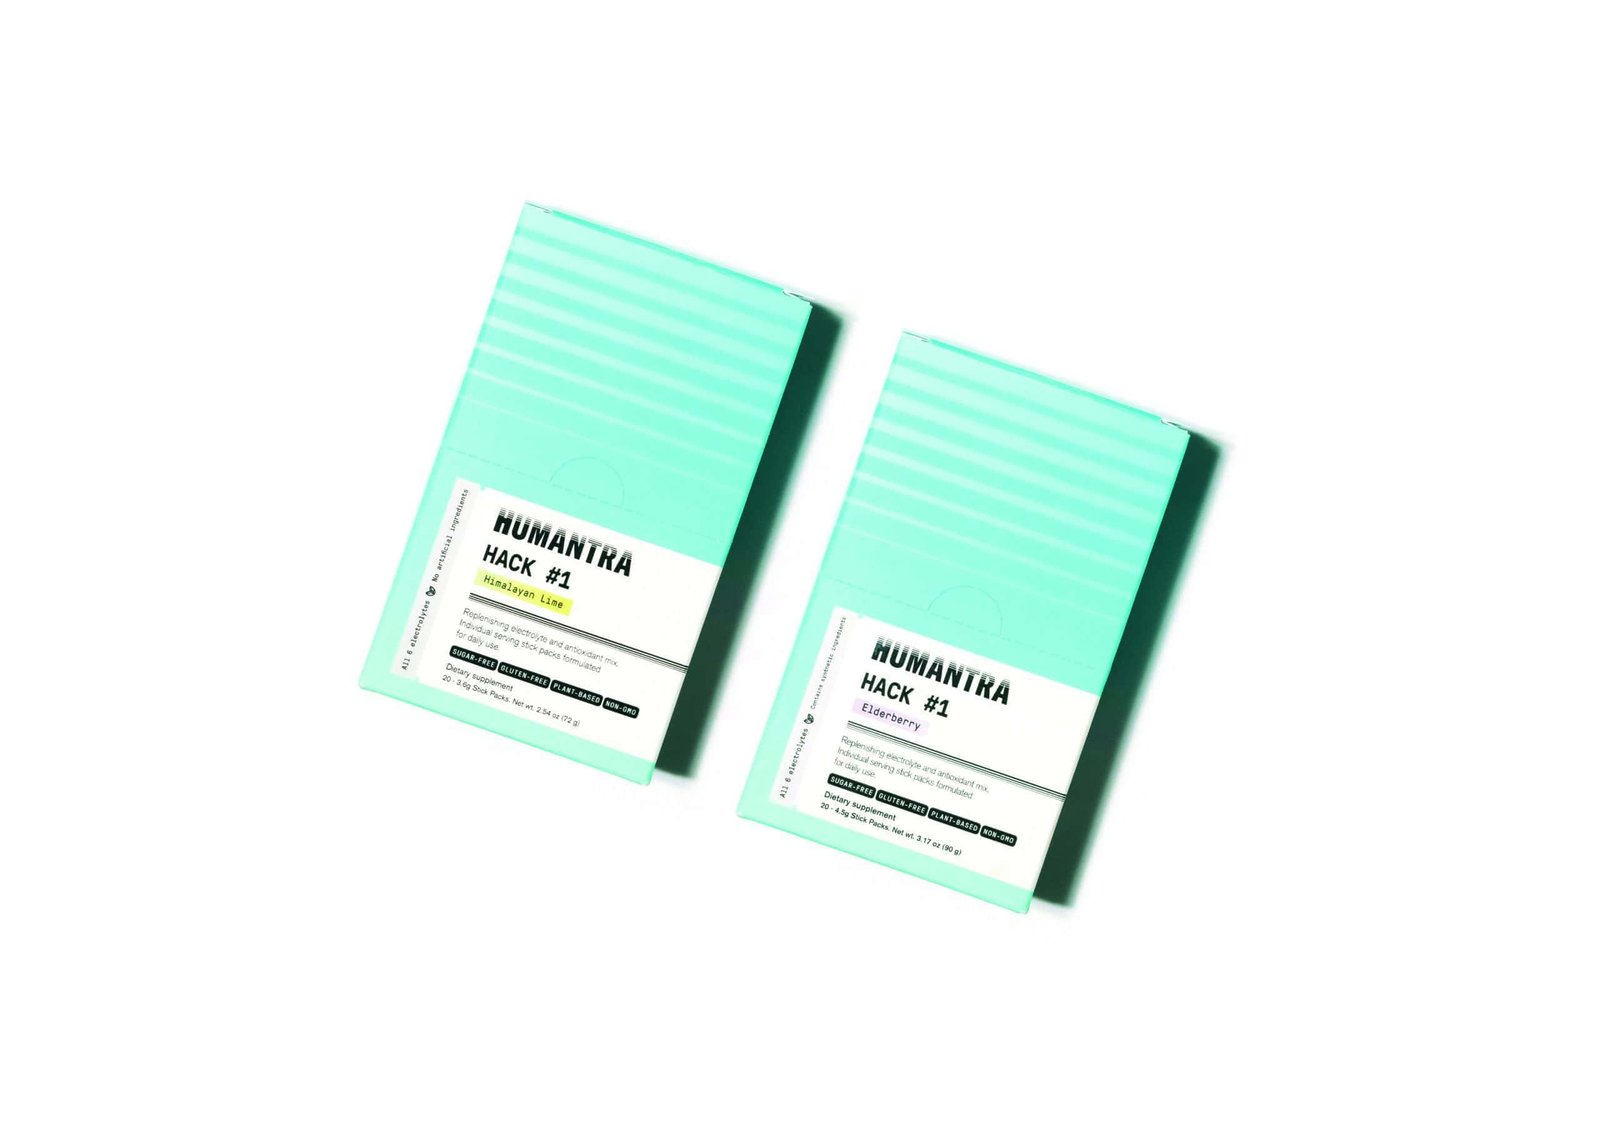 Just two mint colored notebooks on a white background.